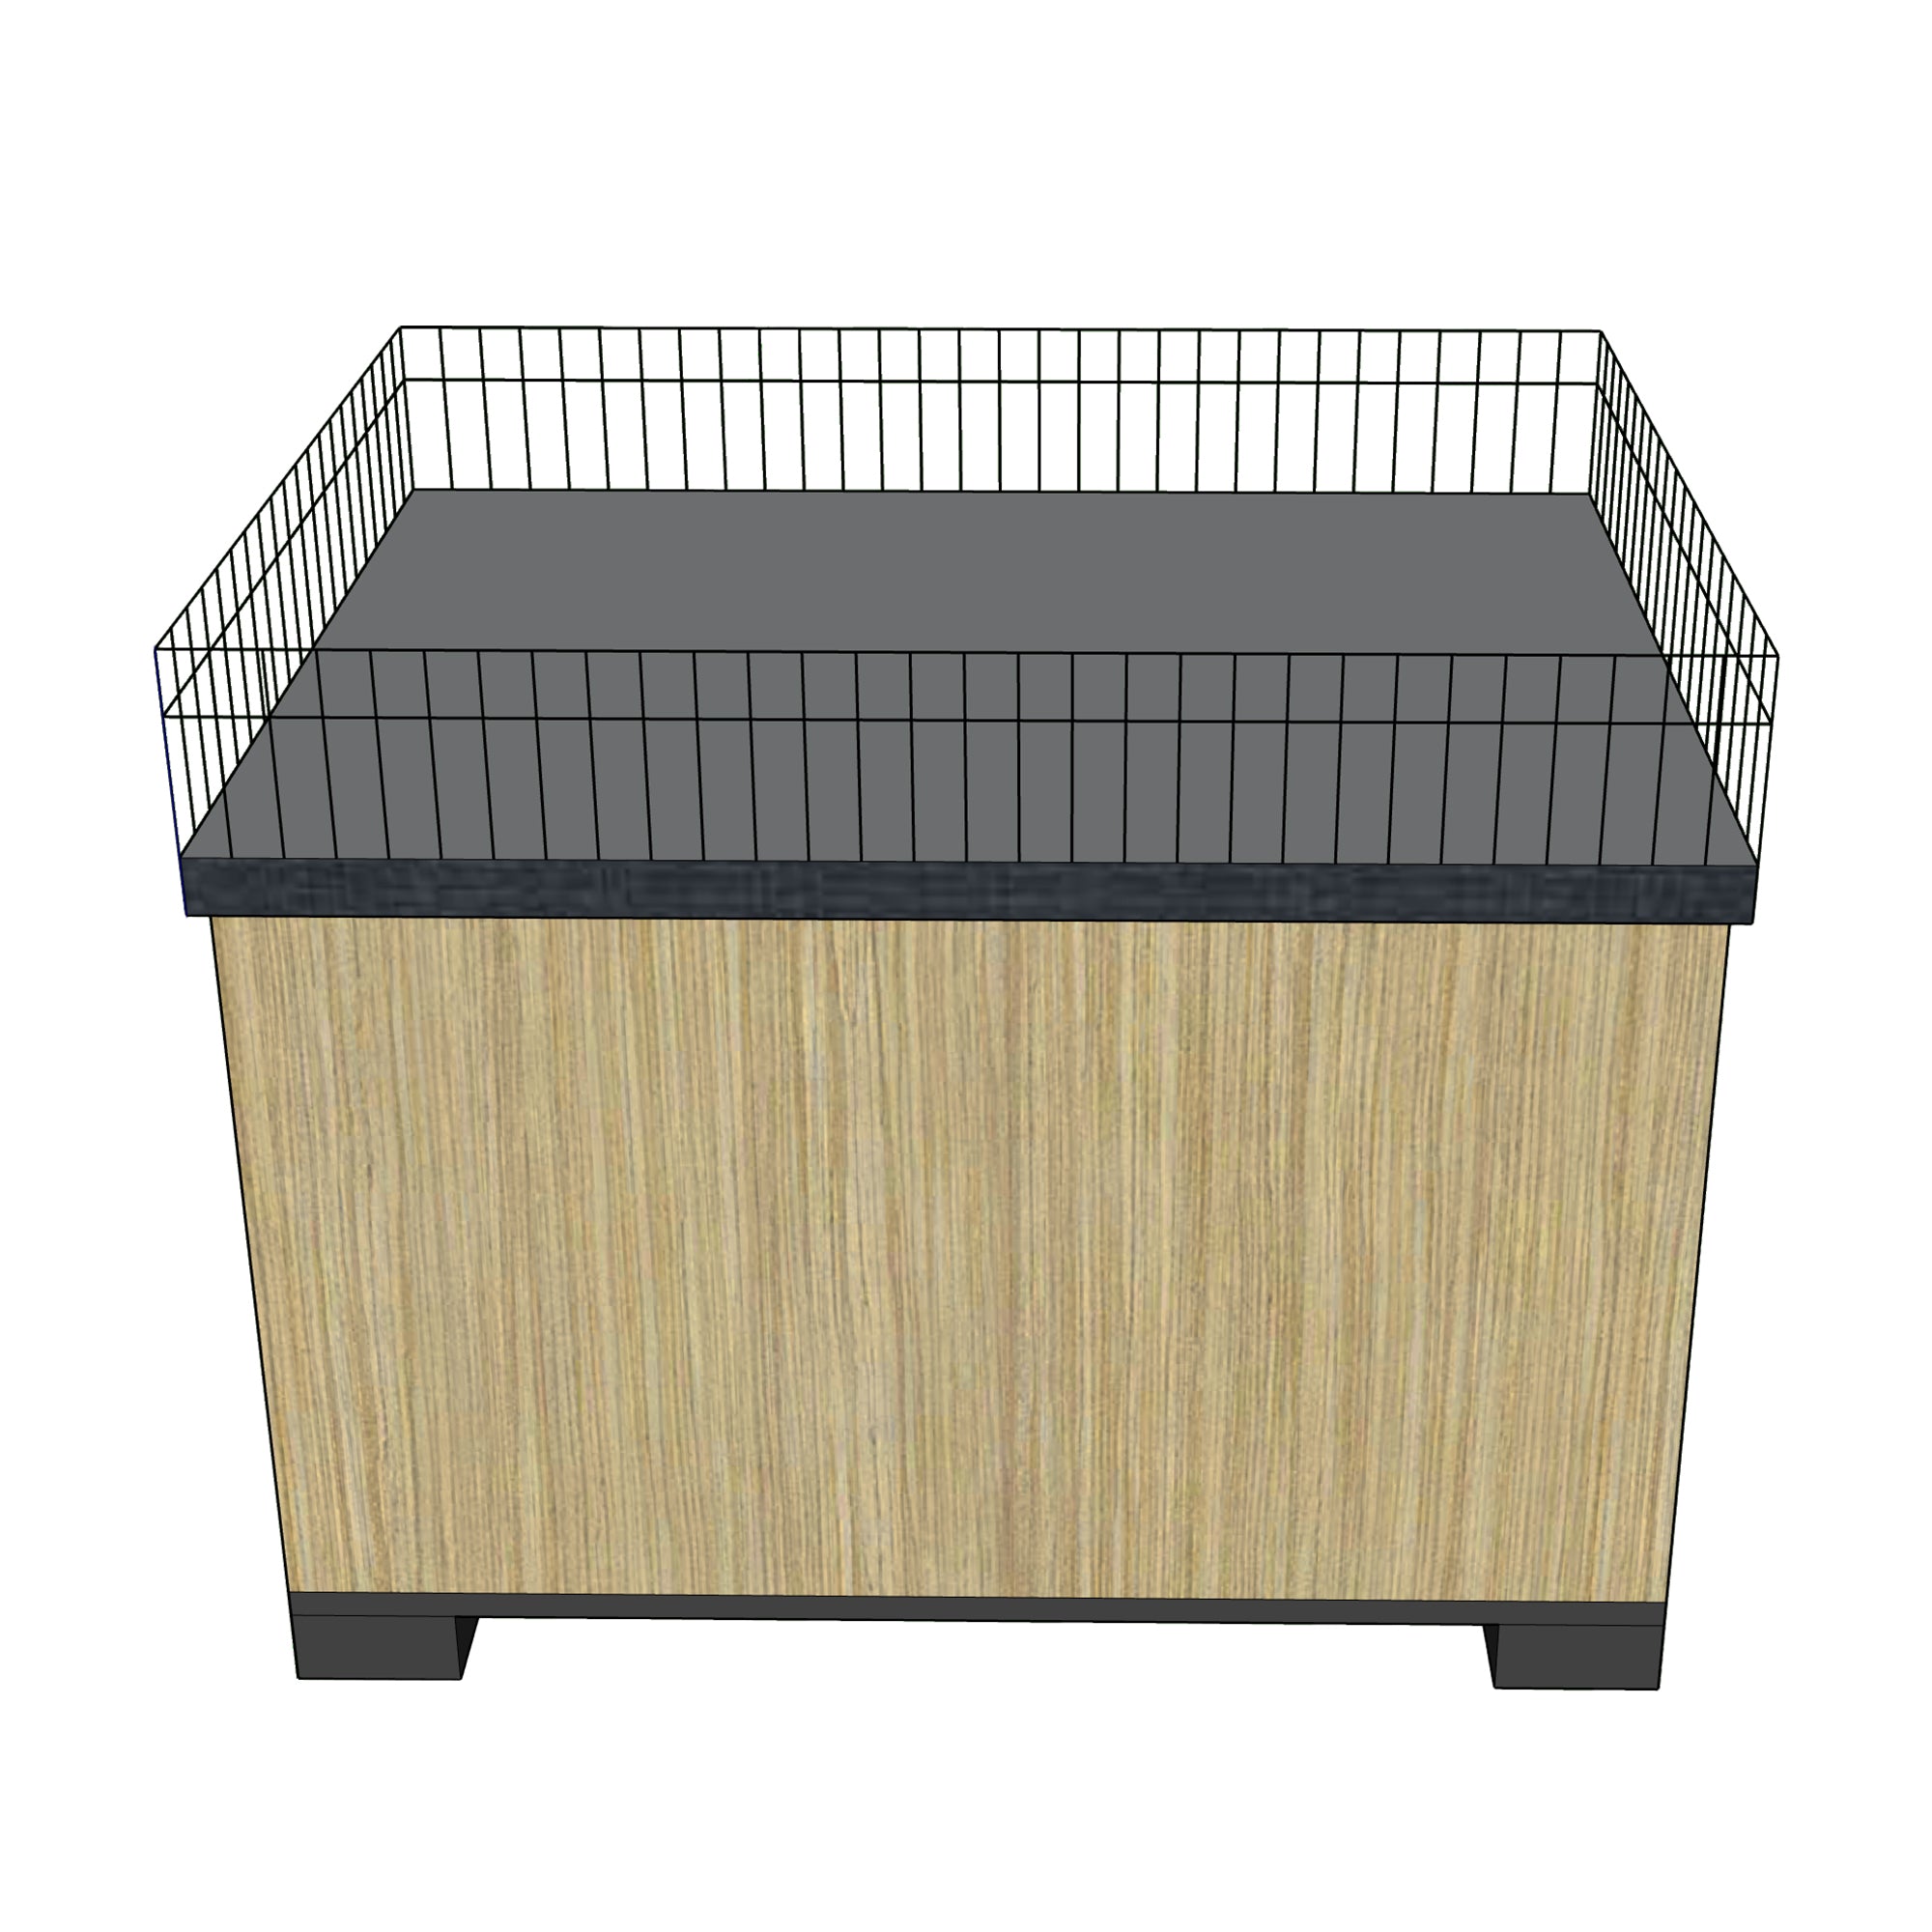 supermarket display sales promo table with wire fence